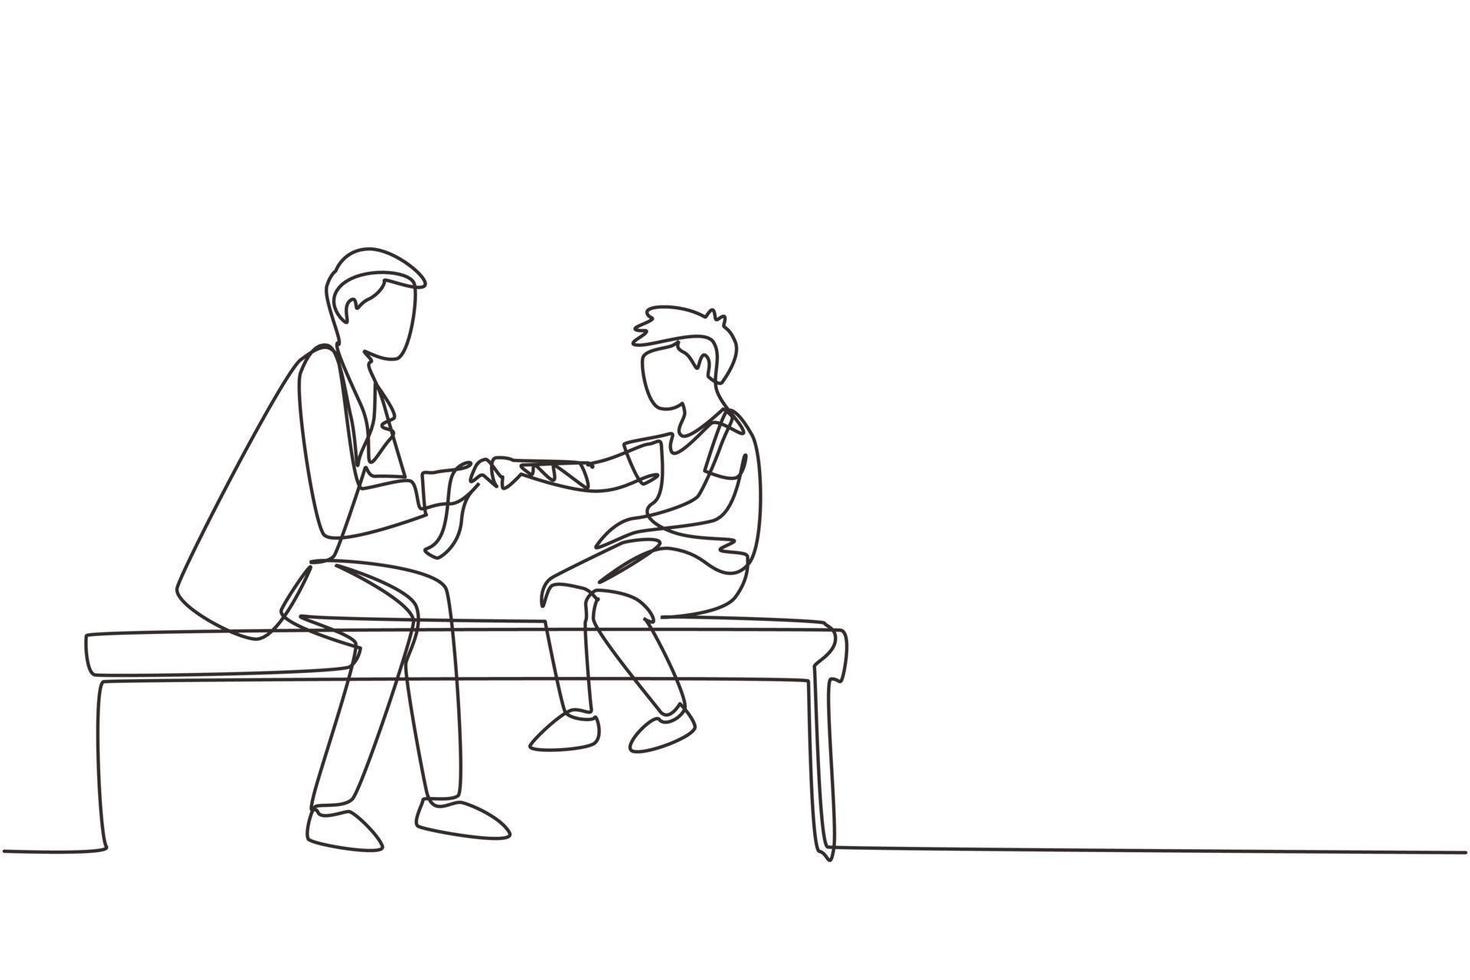 Continuous one line drawing children's doctor works with little boy. Orthopedist bandages boy's hand. Doctor treating child in medical office or hospital. Single line draw design vector illustration